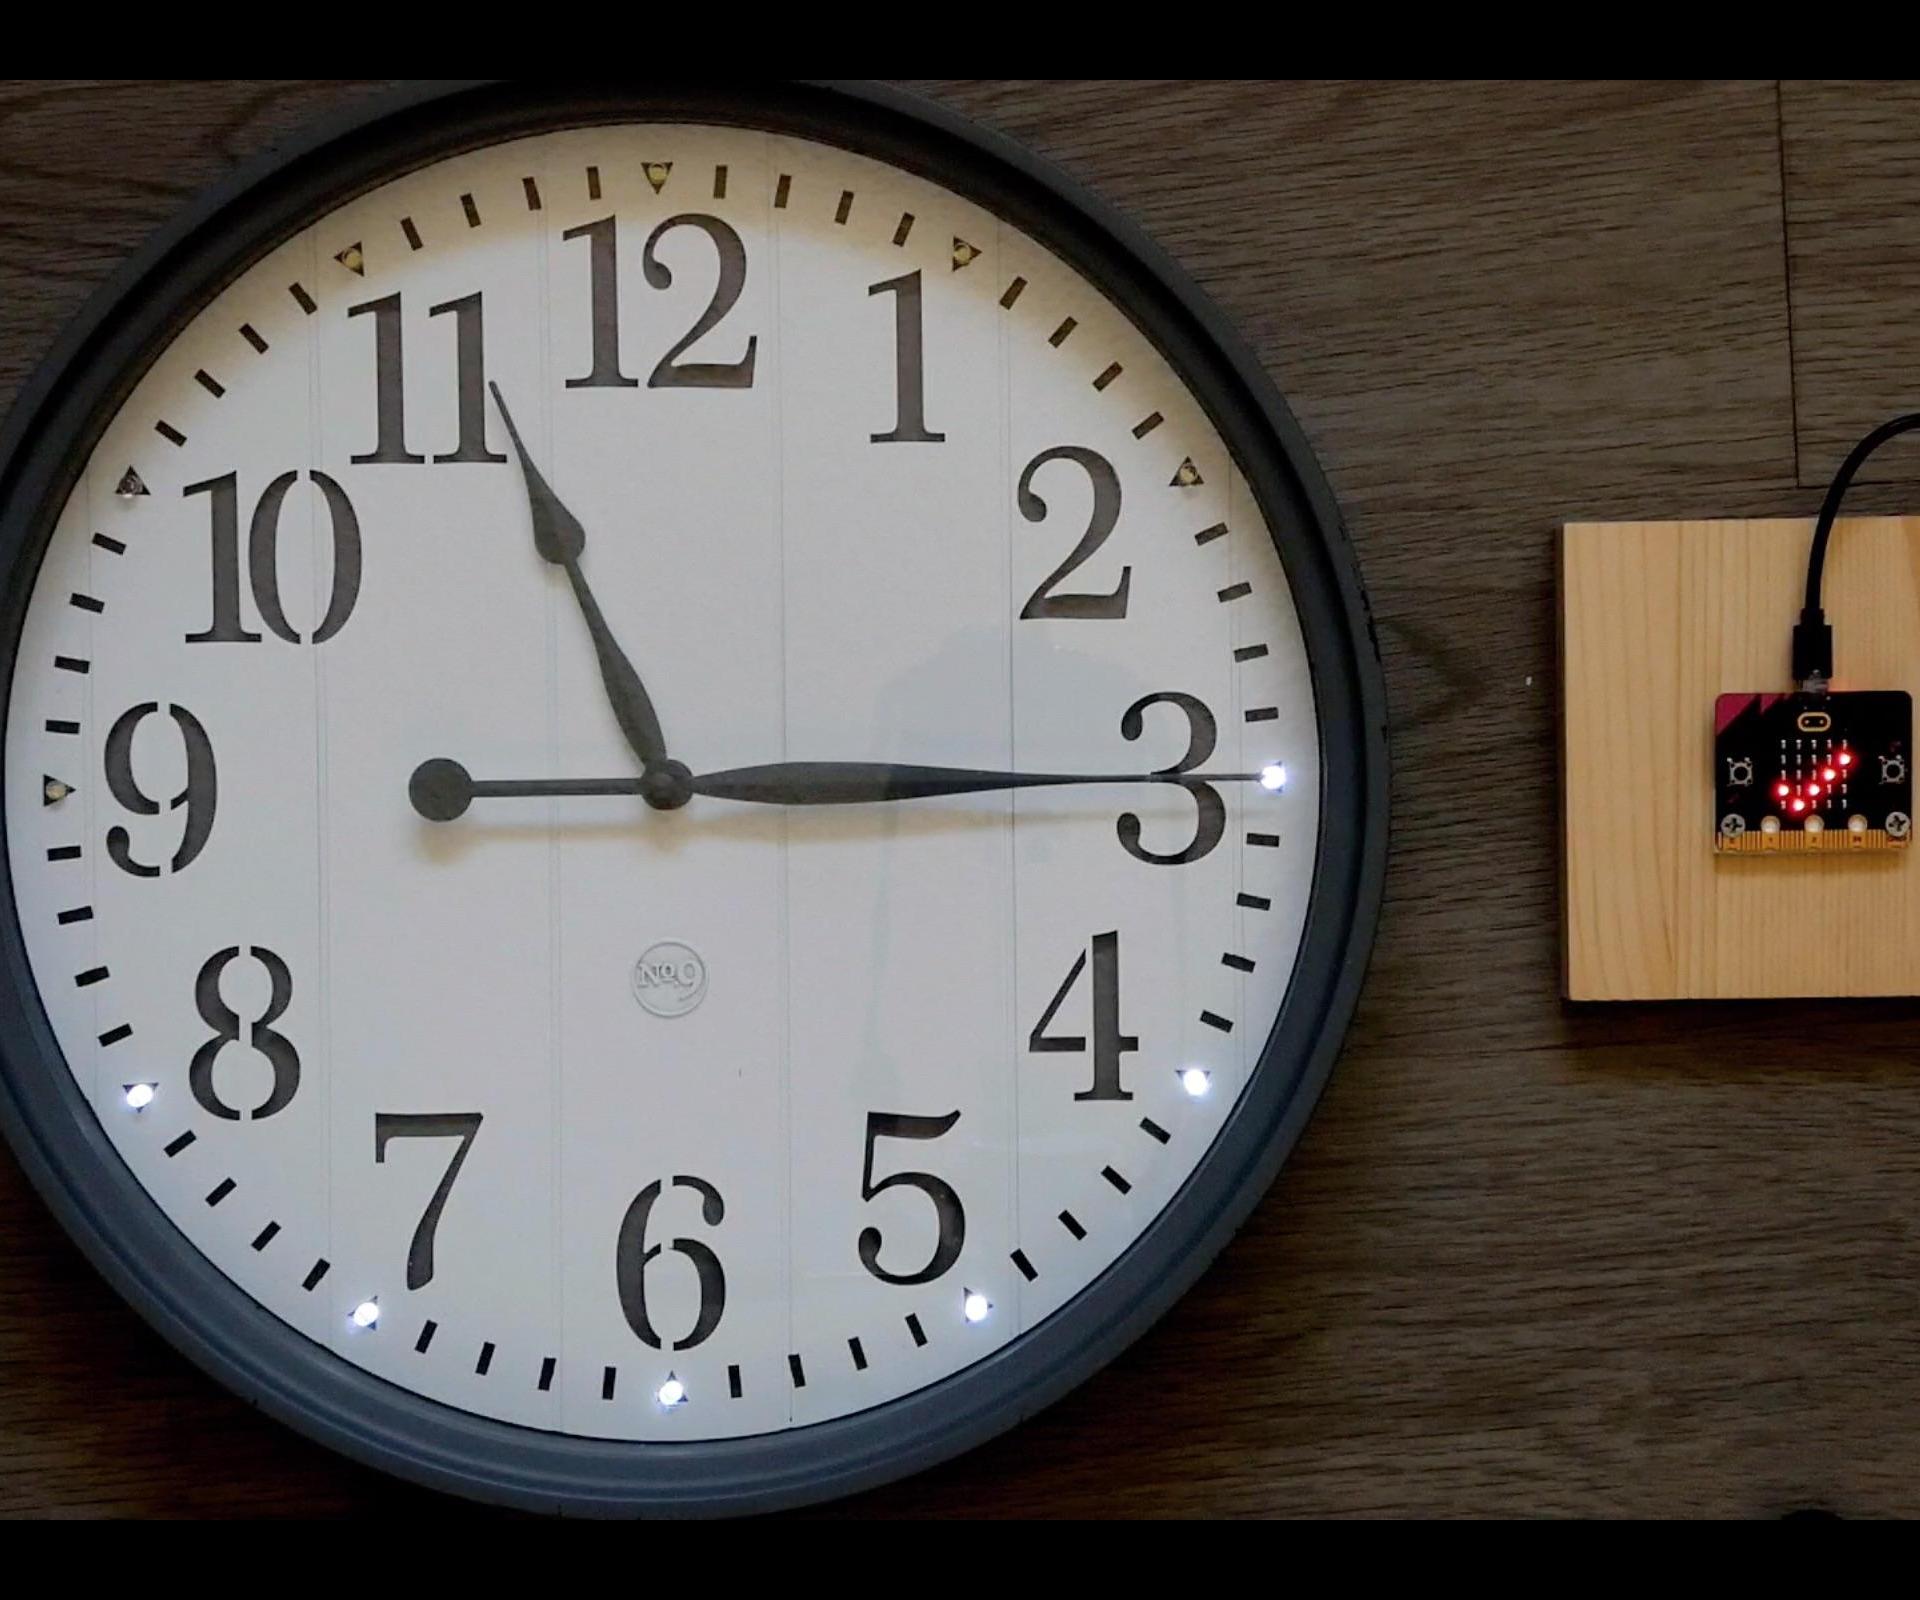 Modified Wall Clock With Pomodoro Timer